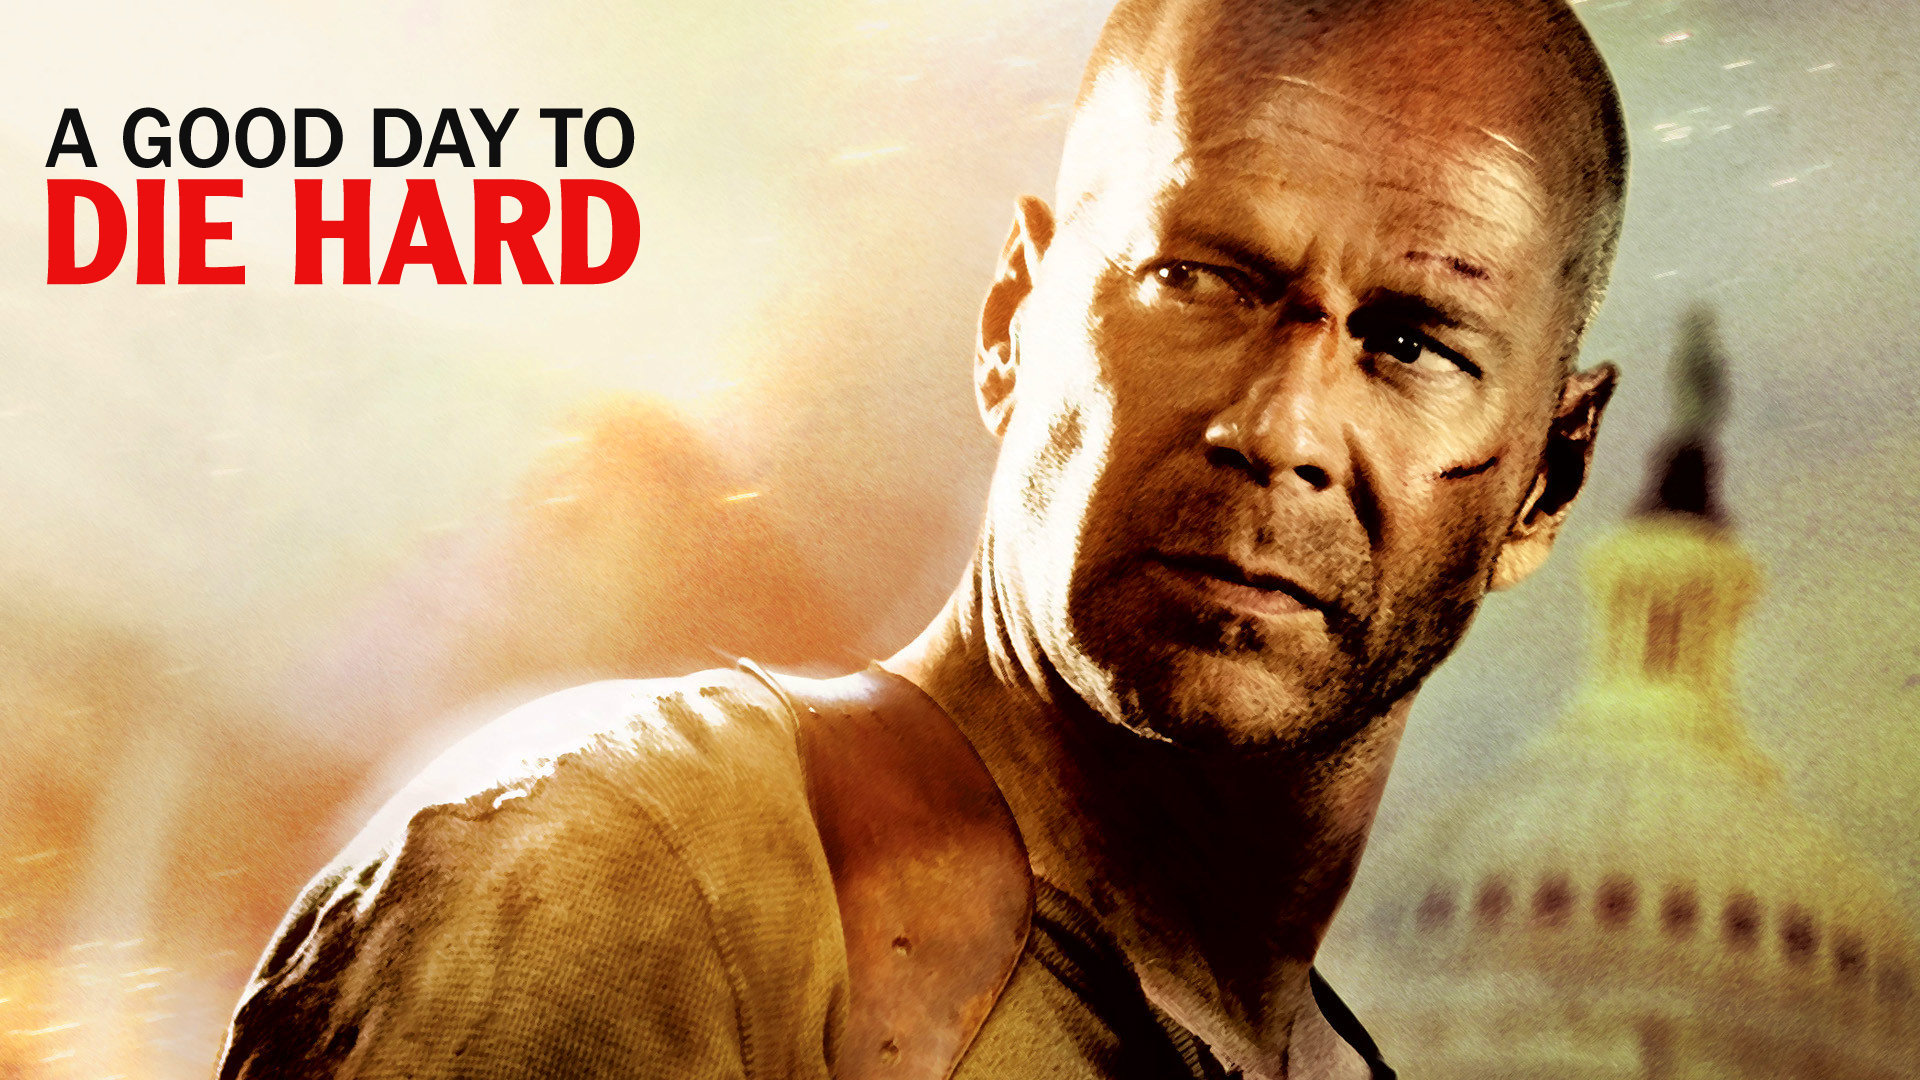 A Good Day To Die Hard Wallpaper X